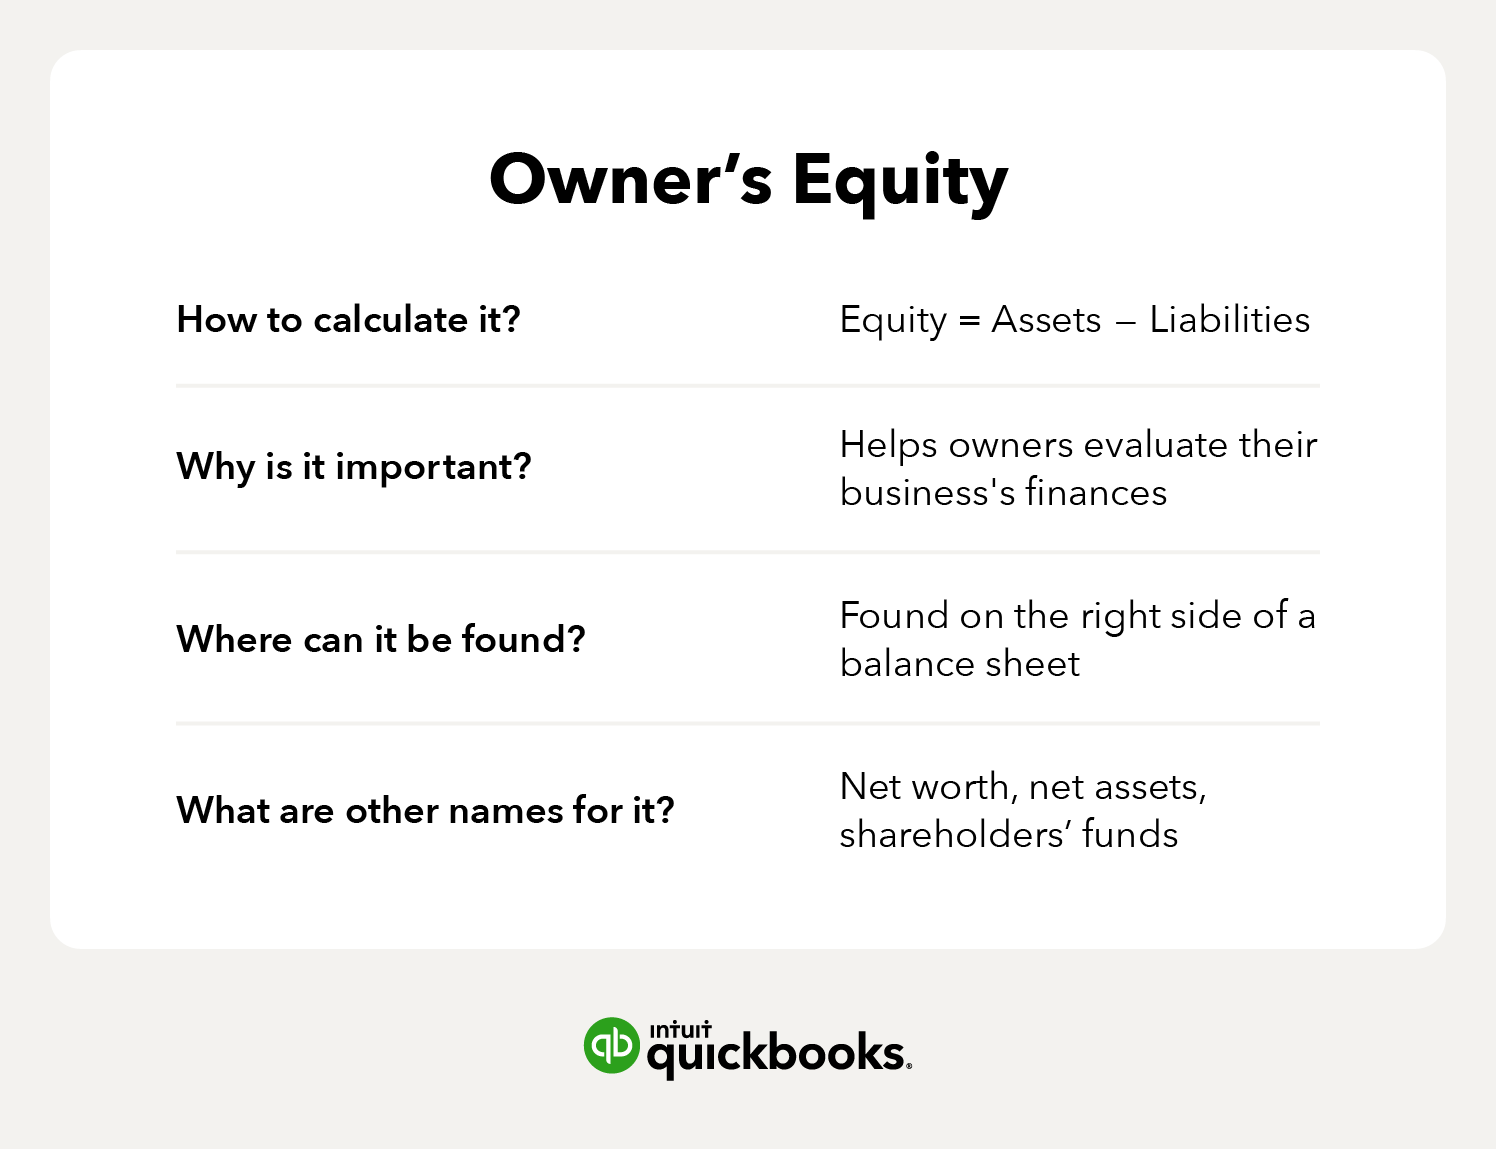 a chart with text covering the different elements of owner's equity and why it's important.